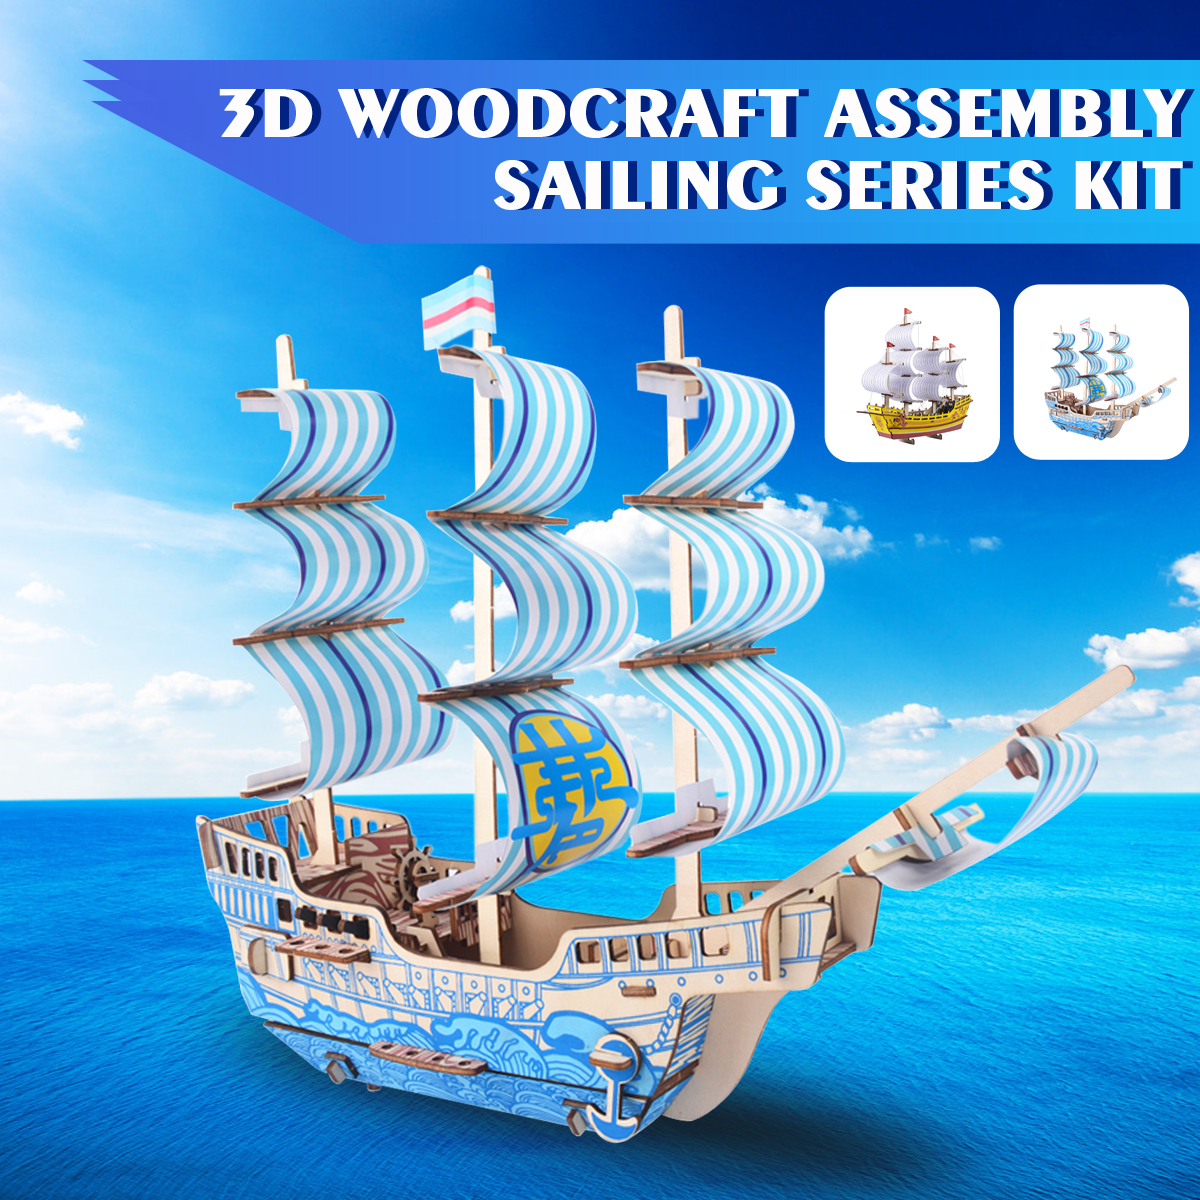 3D-Woodcraft-Assembly-Sailing-Series-Kit-Jigsaw-Puzzle-Decoration-Toy-Model-for-Kids-Gift-1635638-2